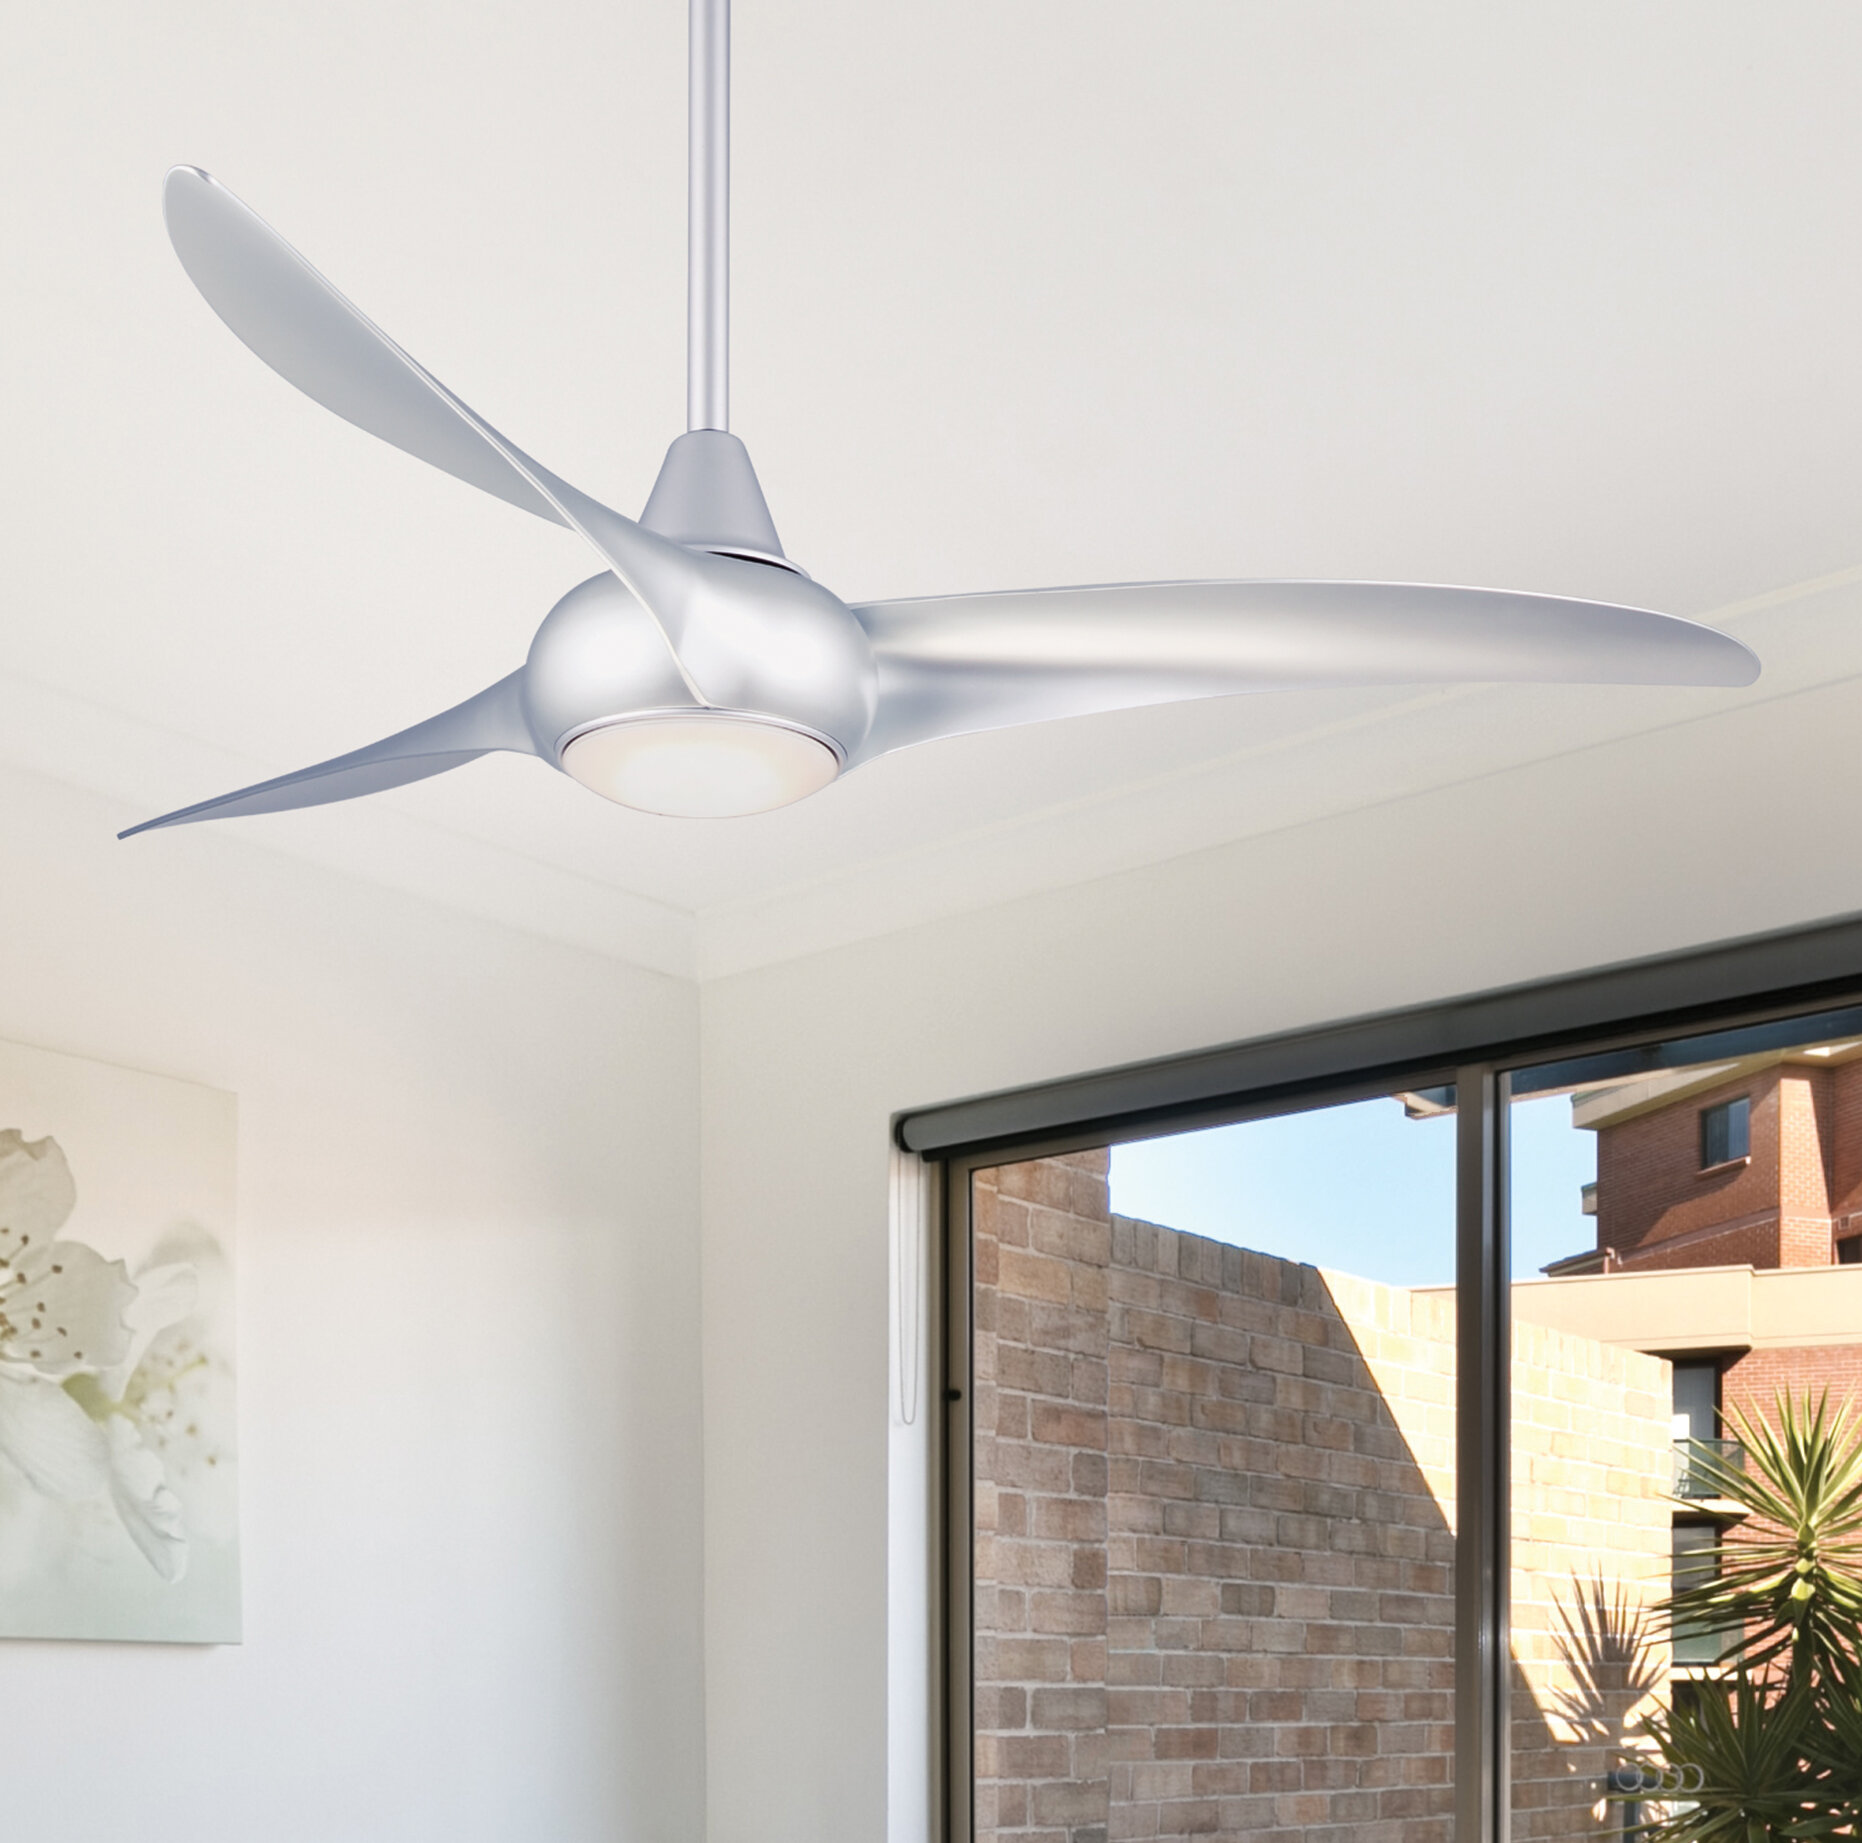 Minka Aire 52 Wave 3 Blade Led Propeller Ceiling Fan With Remote Control And Light Kit Included Reviews Wayfair